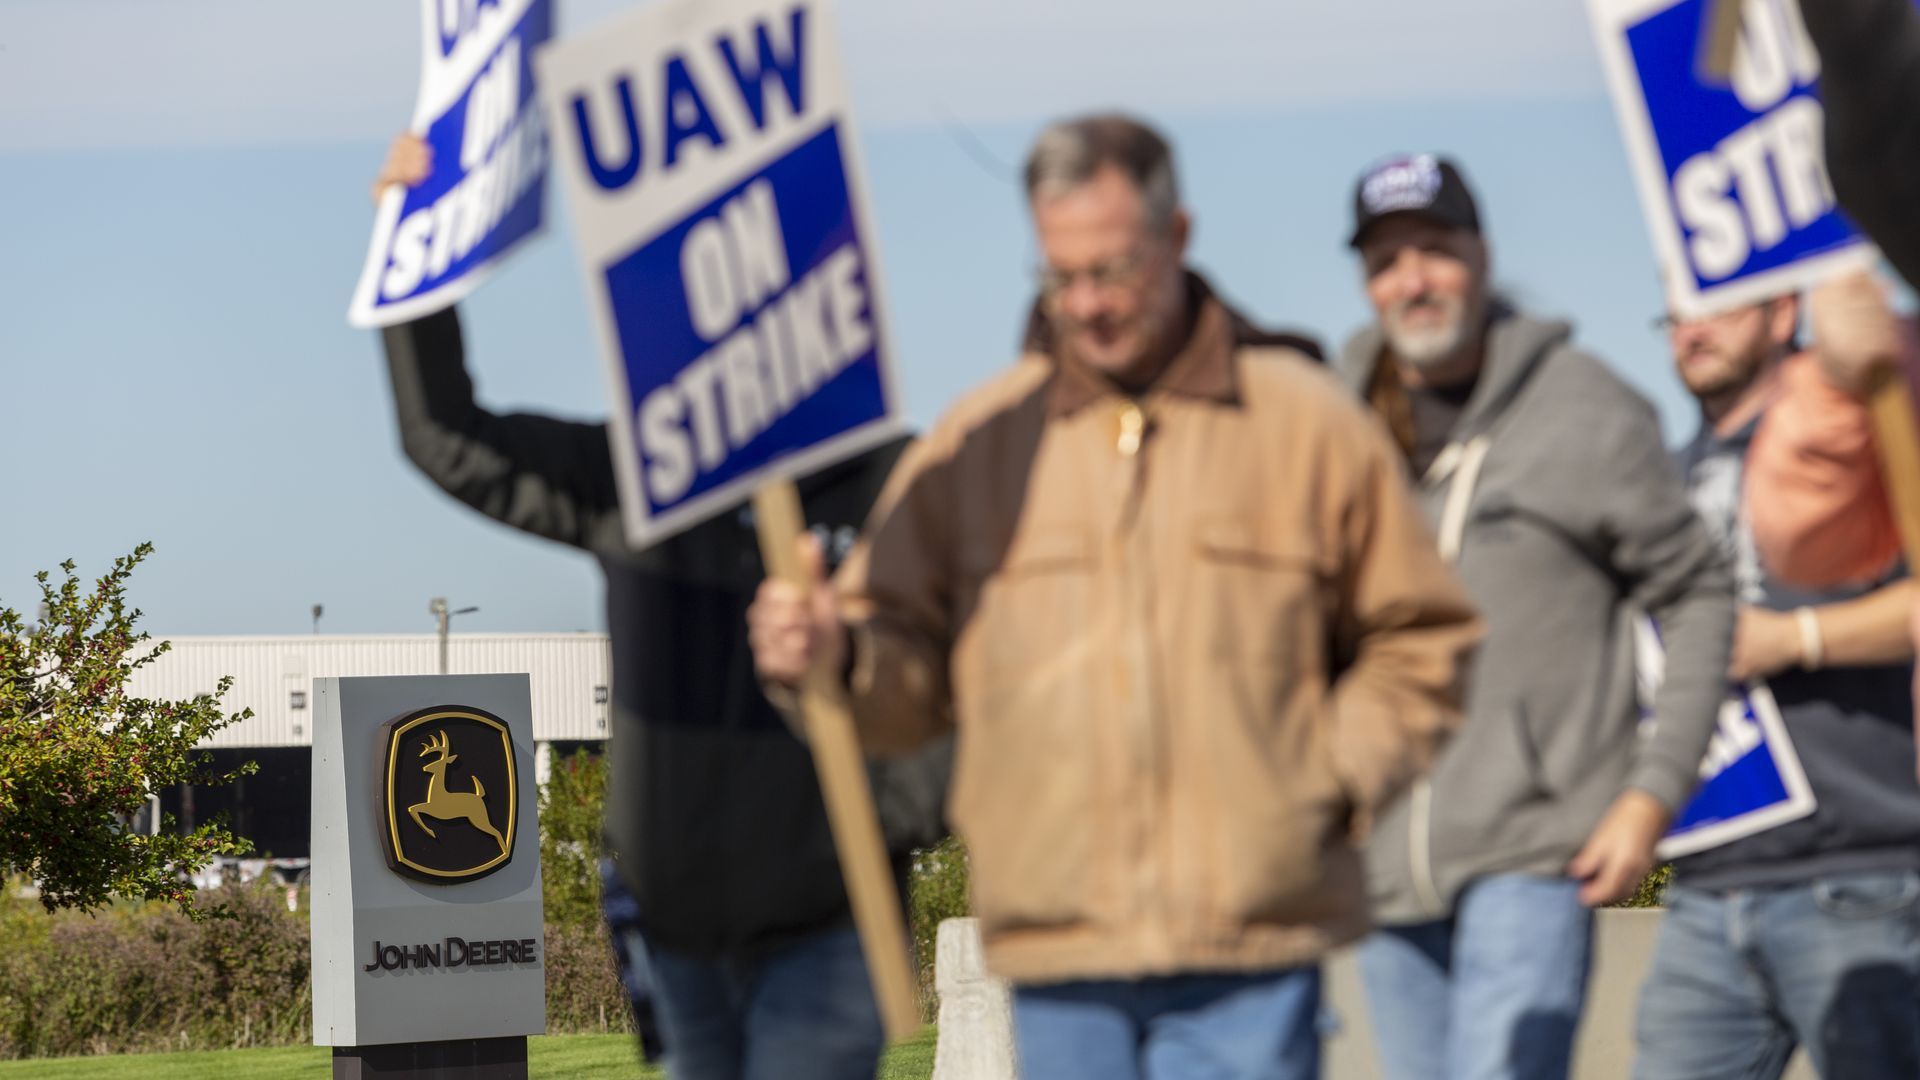 Workers strike outside the John Deere Des Moines Works facility in Ankeny, Iowa on Friday. 